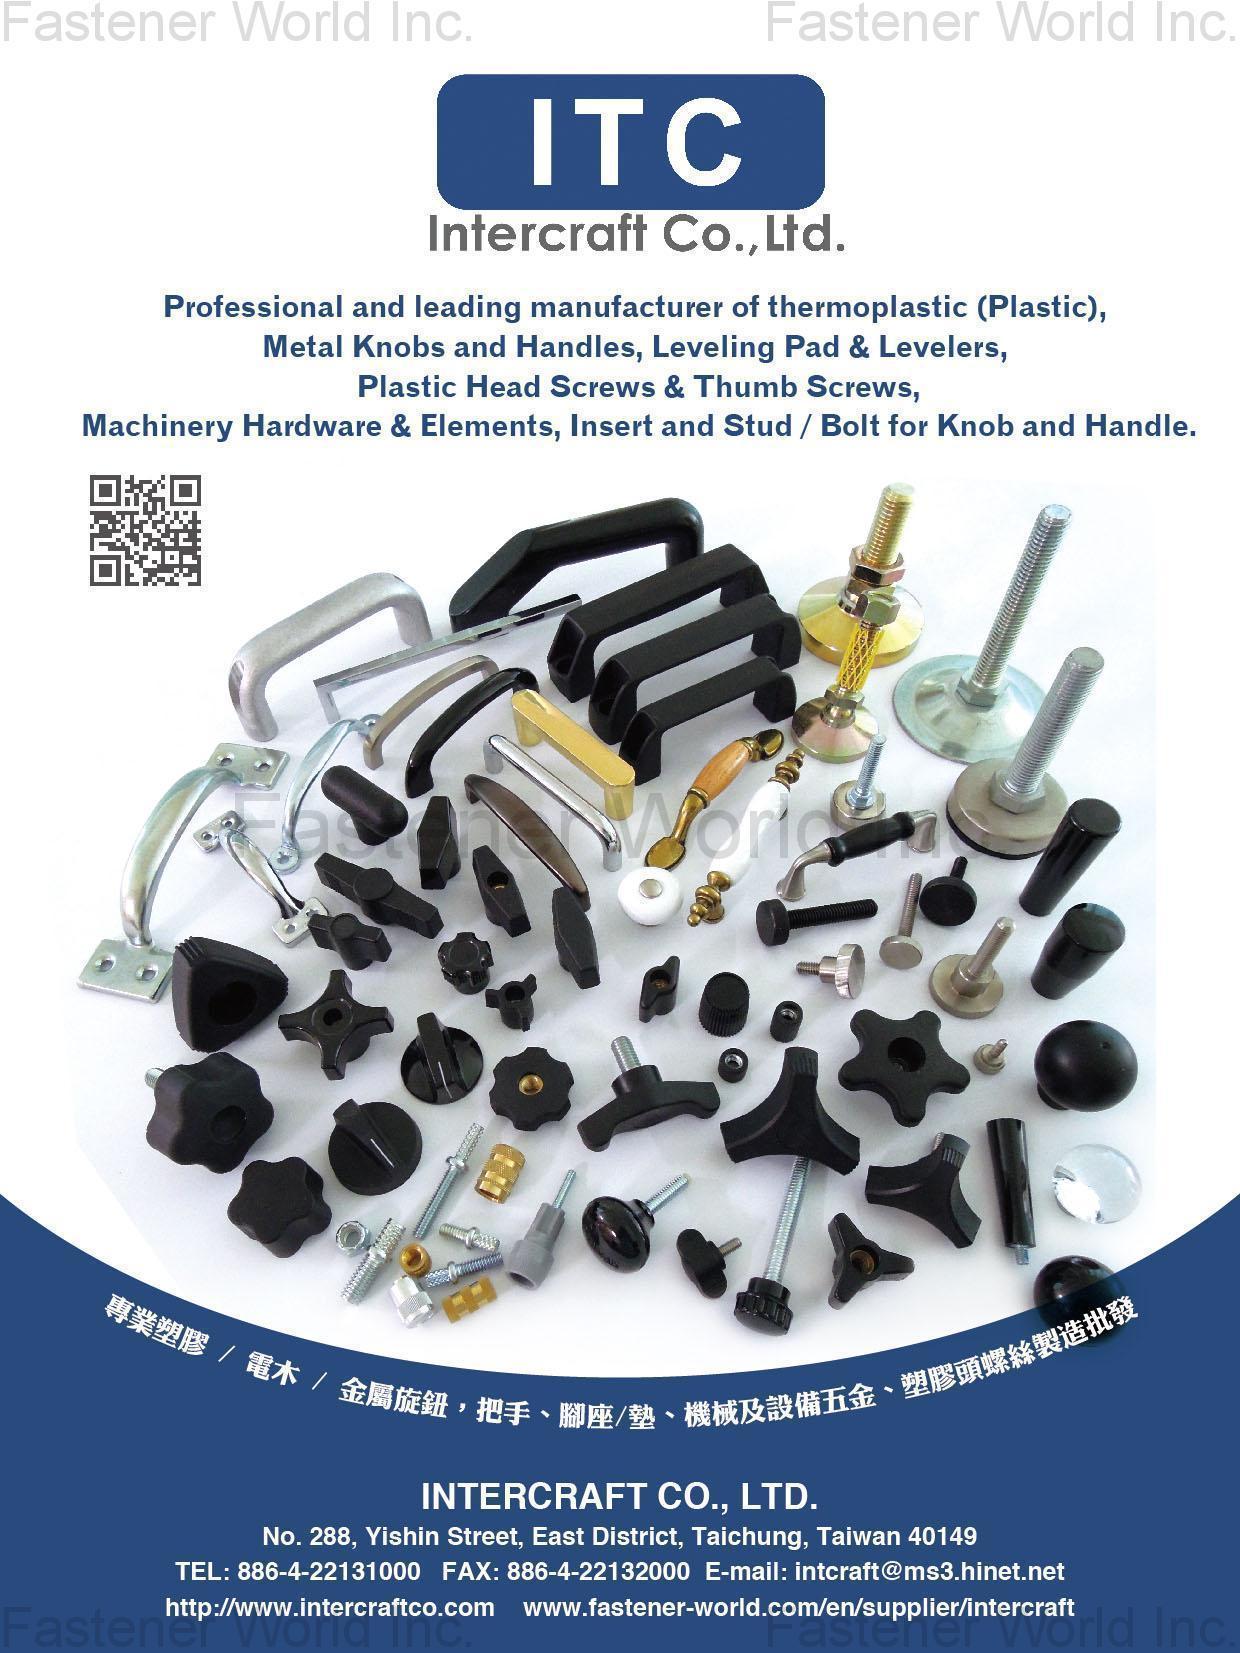 INTERCRAFT CO., LTD. , Thermoplastic (Plastic), Metal Knobs and Handles, Leveling Pad & Levelers, Plastic Head Screws & Thumb Screws, Machinery Hardware & Elements, Insert and Stud / Bolt for Knob and Handel , Handles